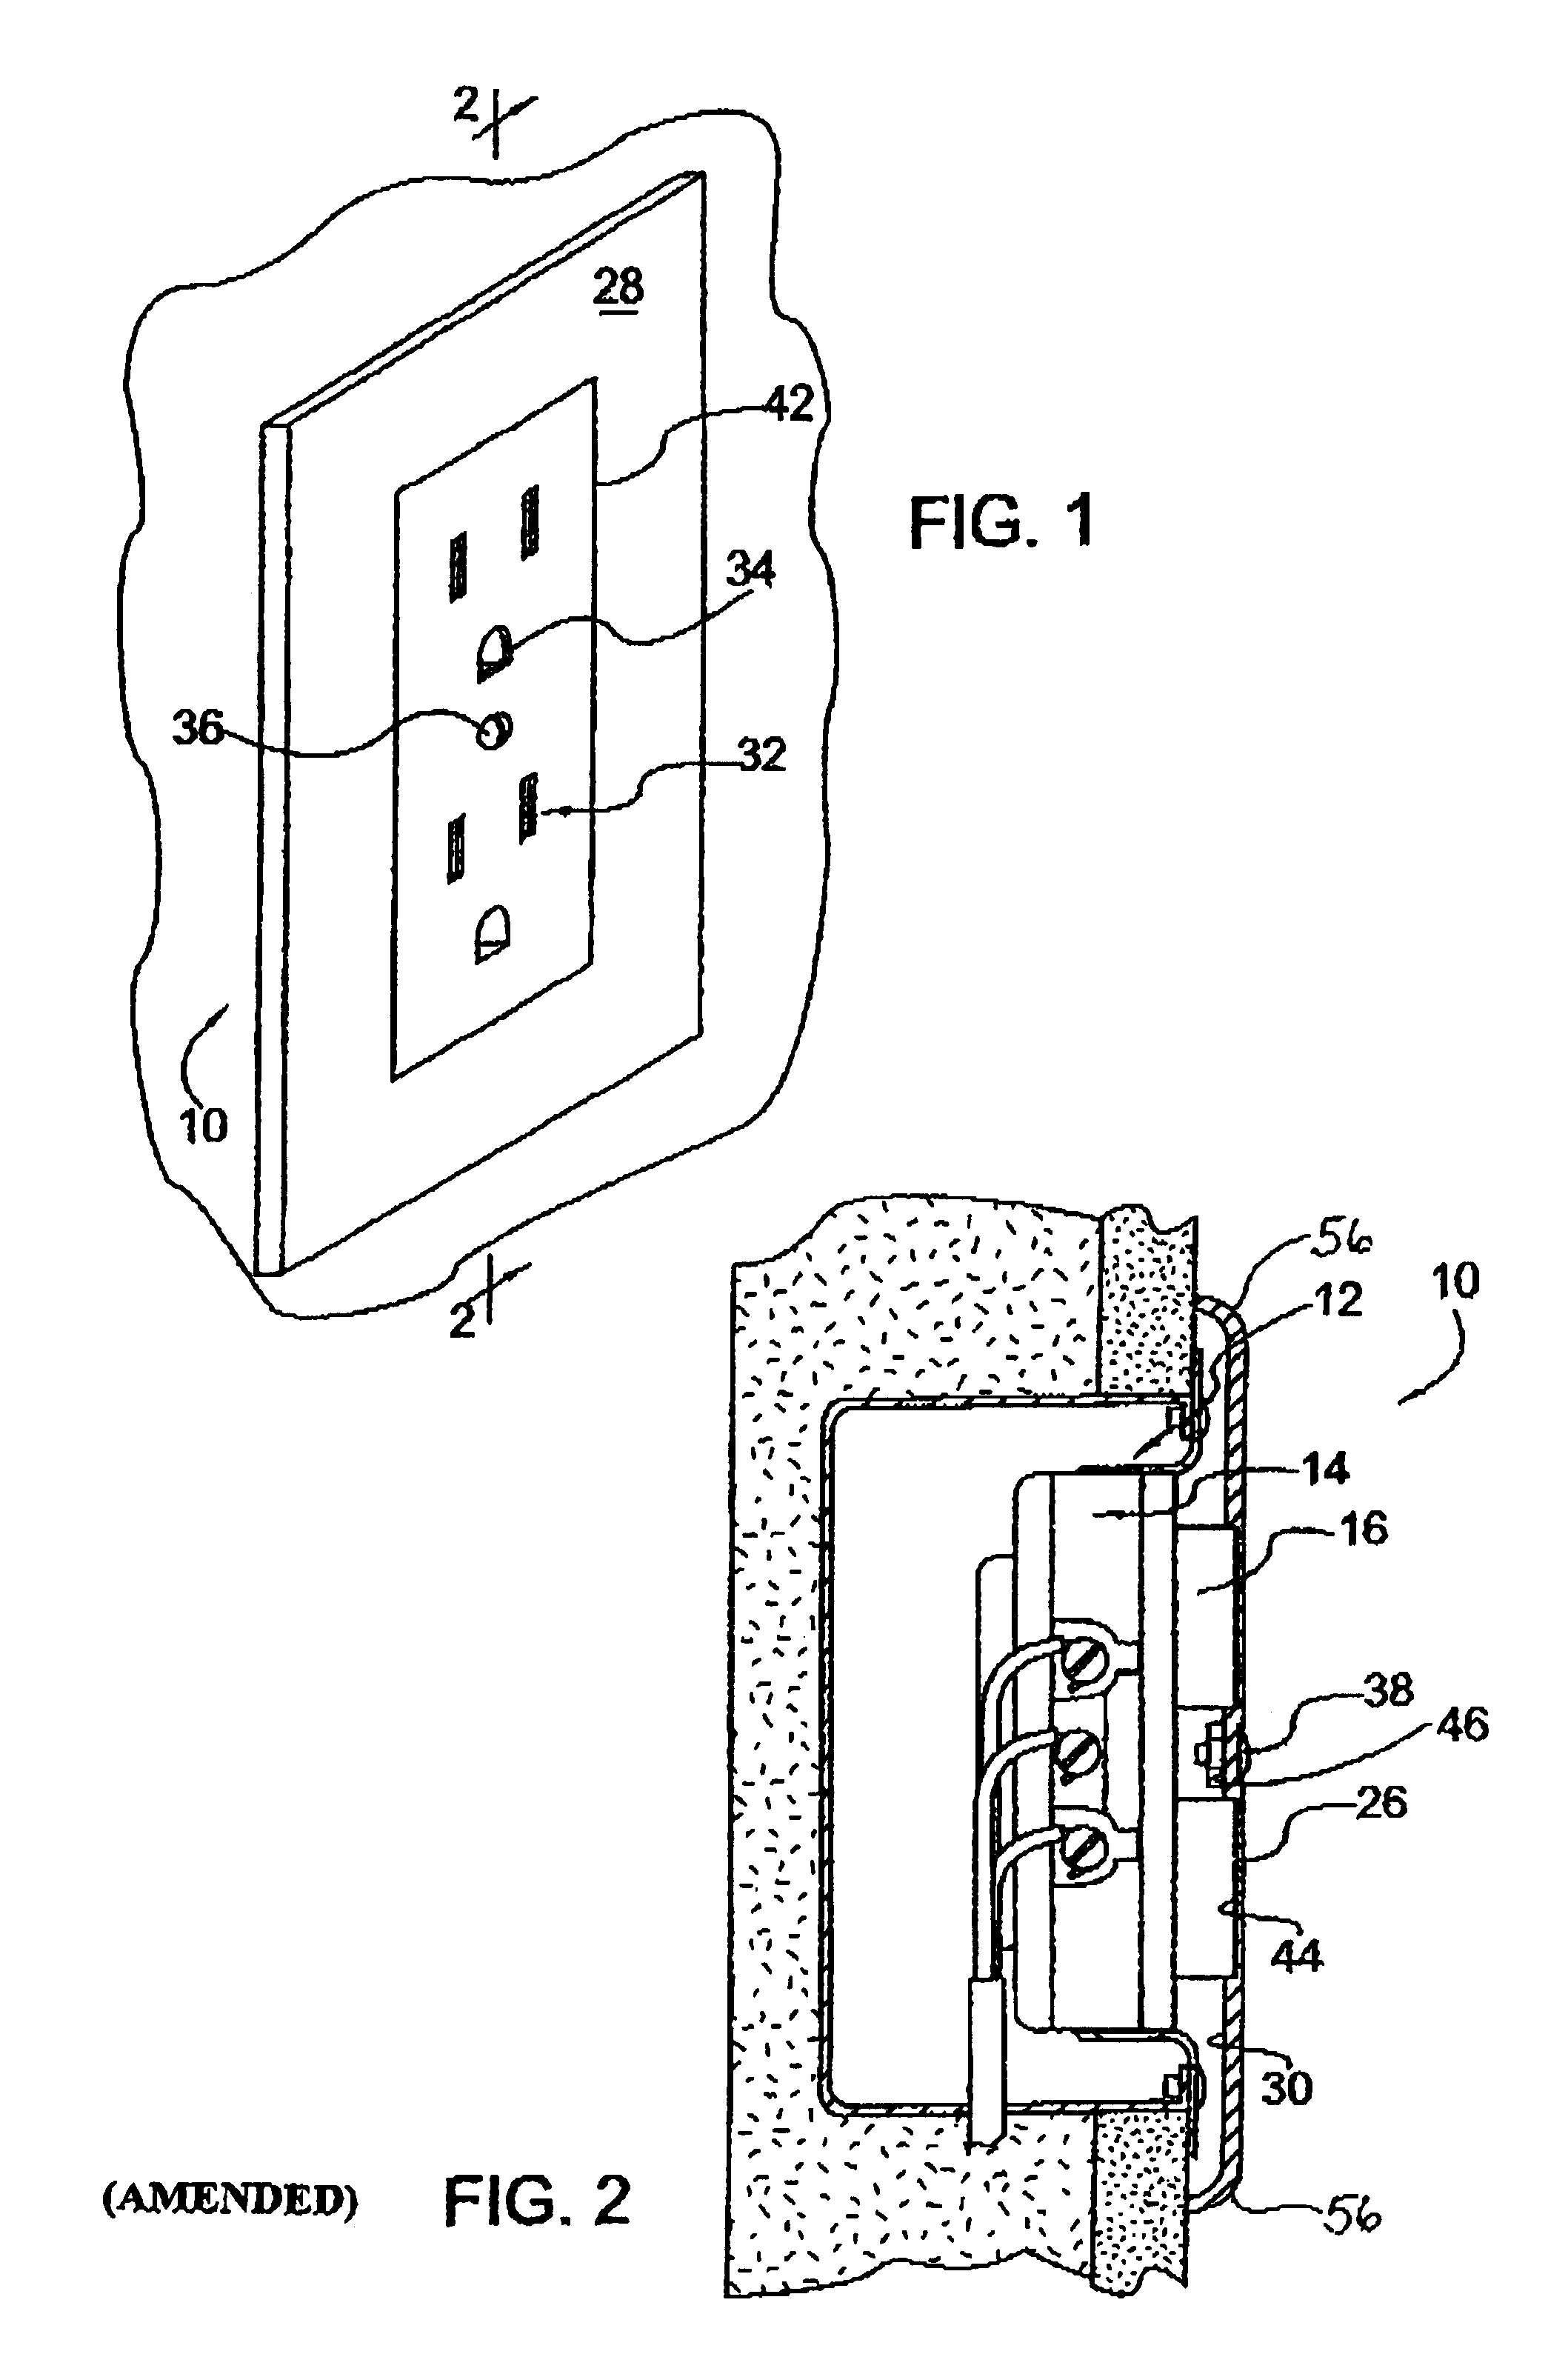 Receptacle-mounted cover plate